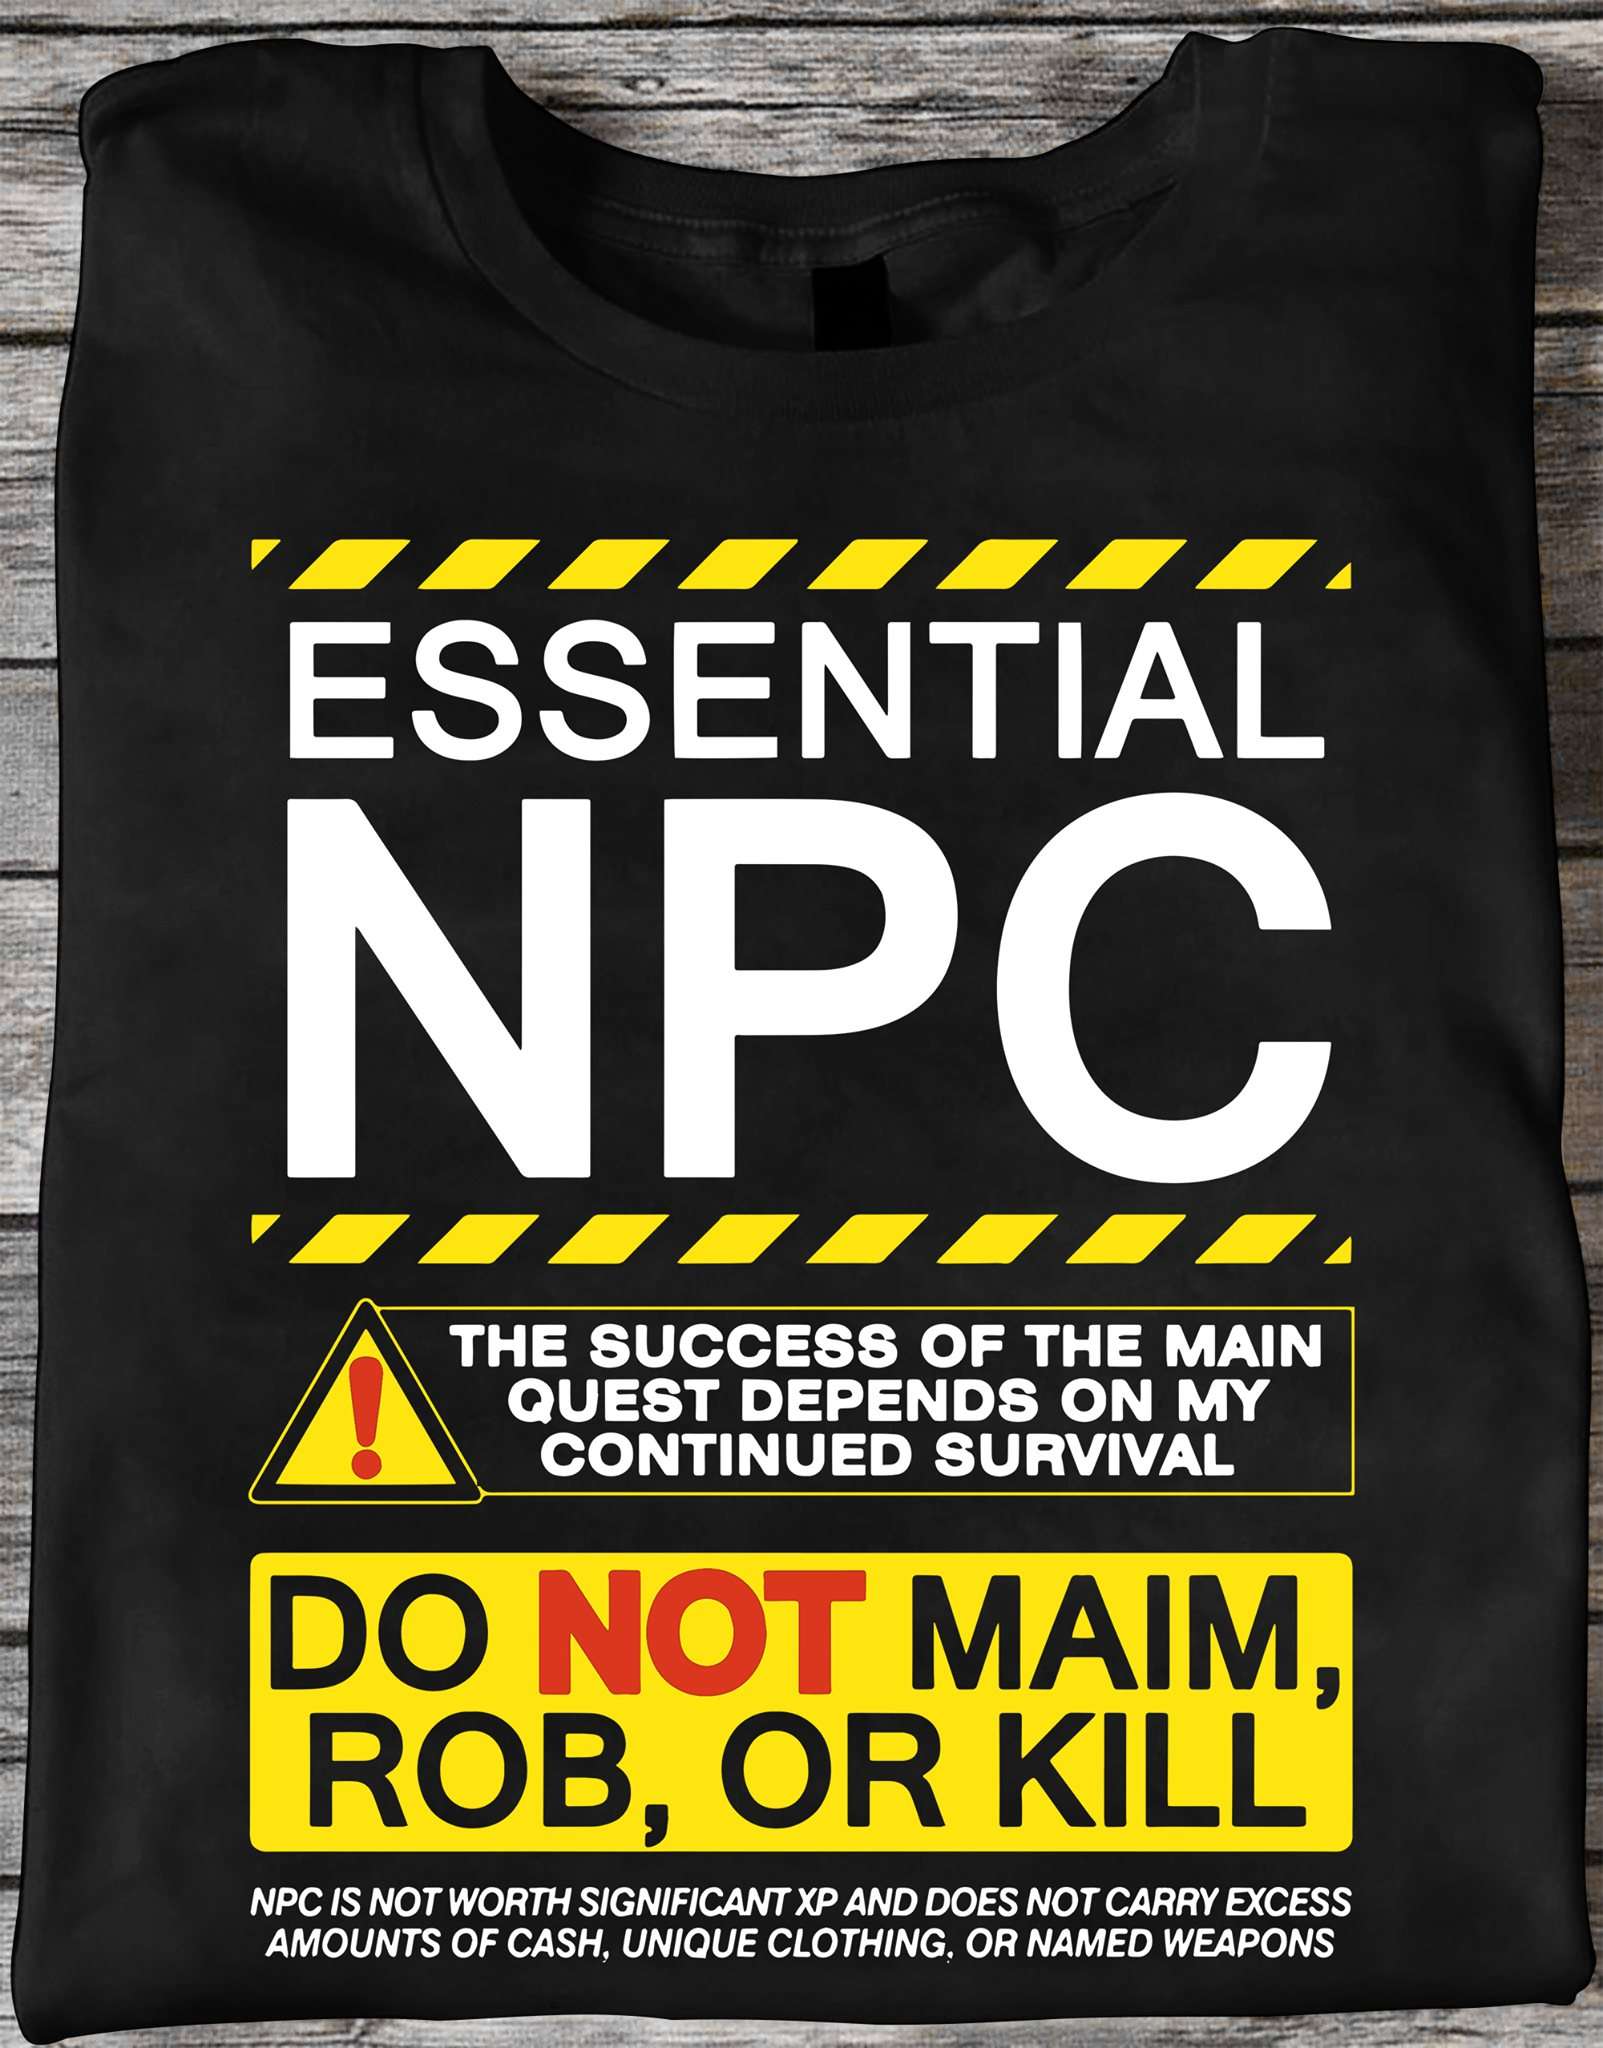 Essential NPC - The success of the main quest depends on my continued survival